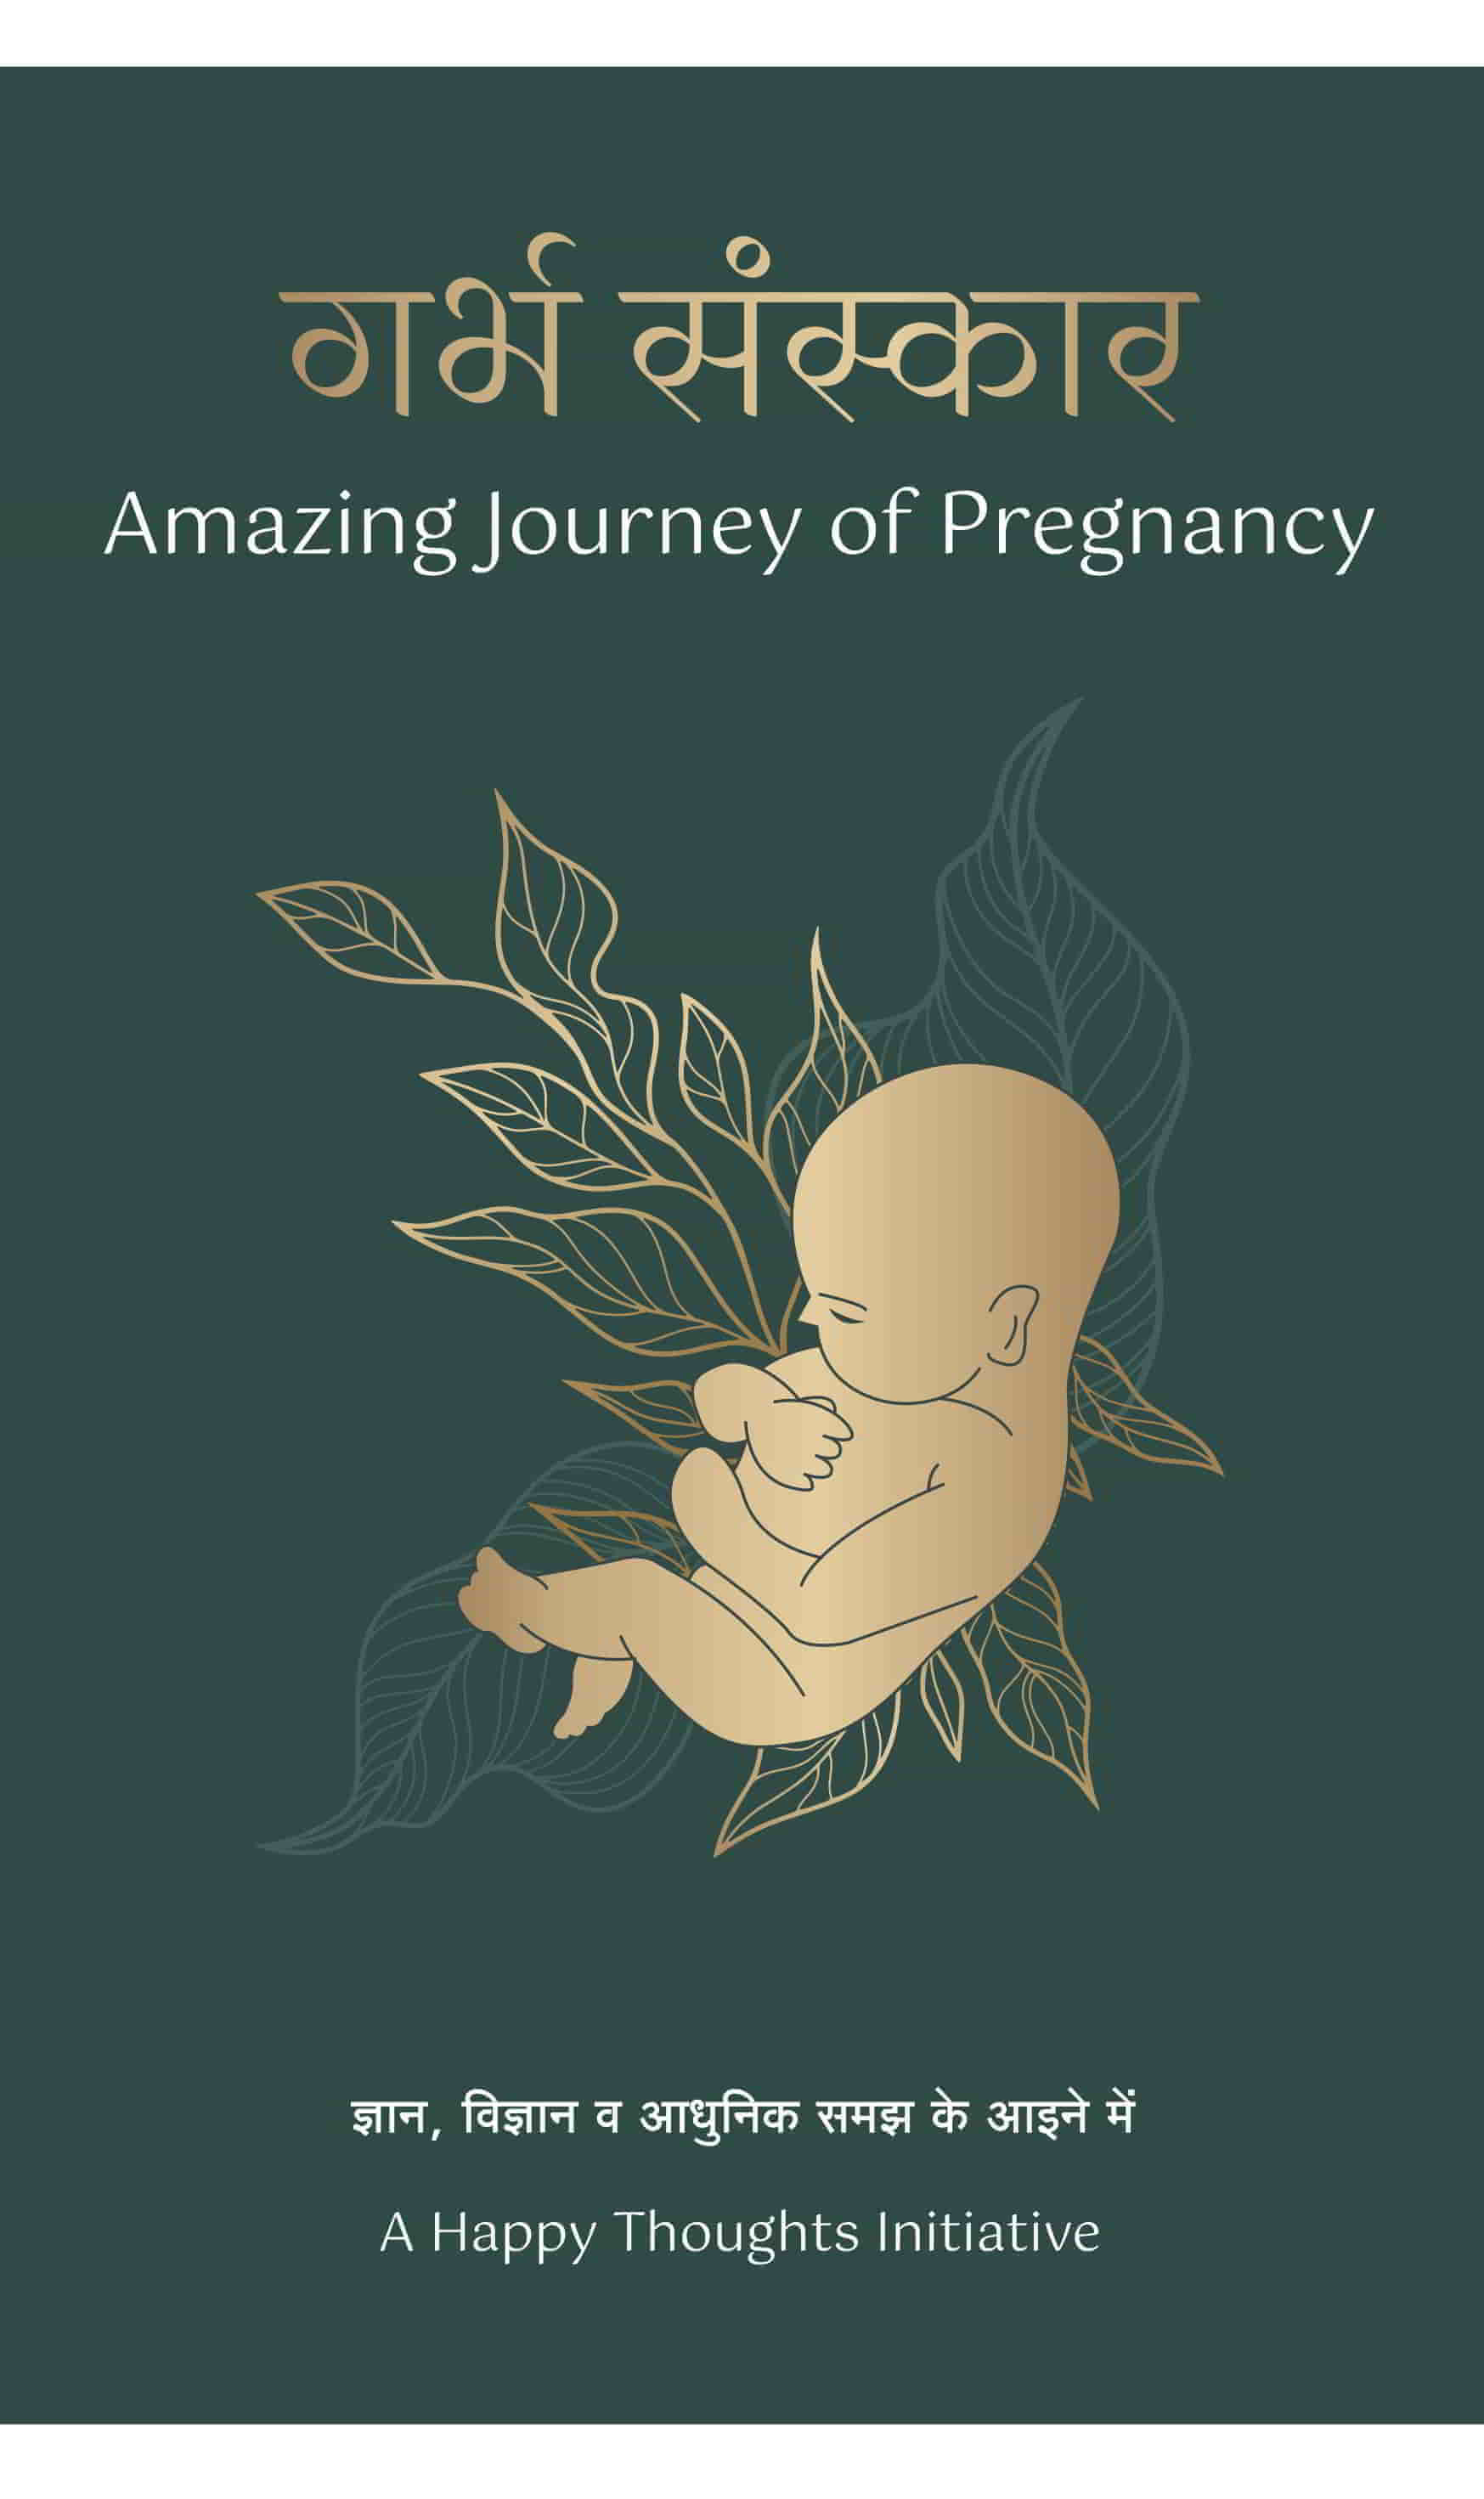 Garbha Sanskar - The Amazing Journey of Pregnancy | A Happy Thoughts Initiative | Knowledge In The Mirror of Science And Modern Understanding